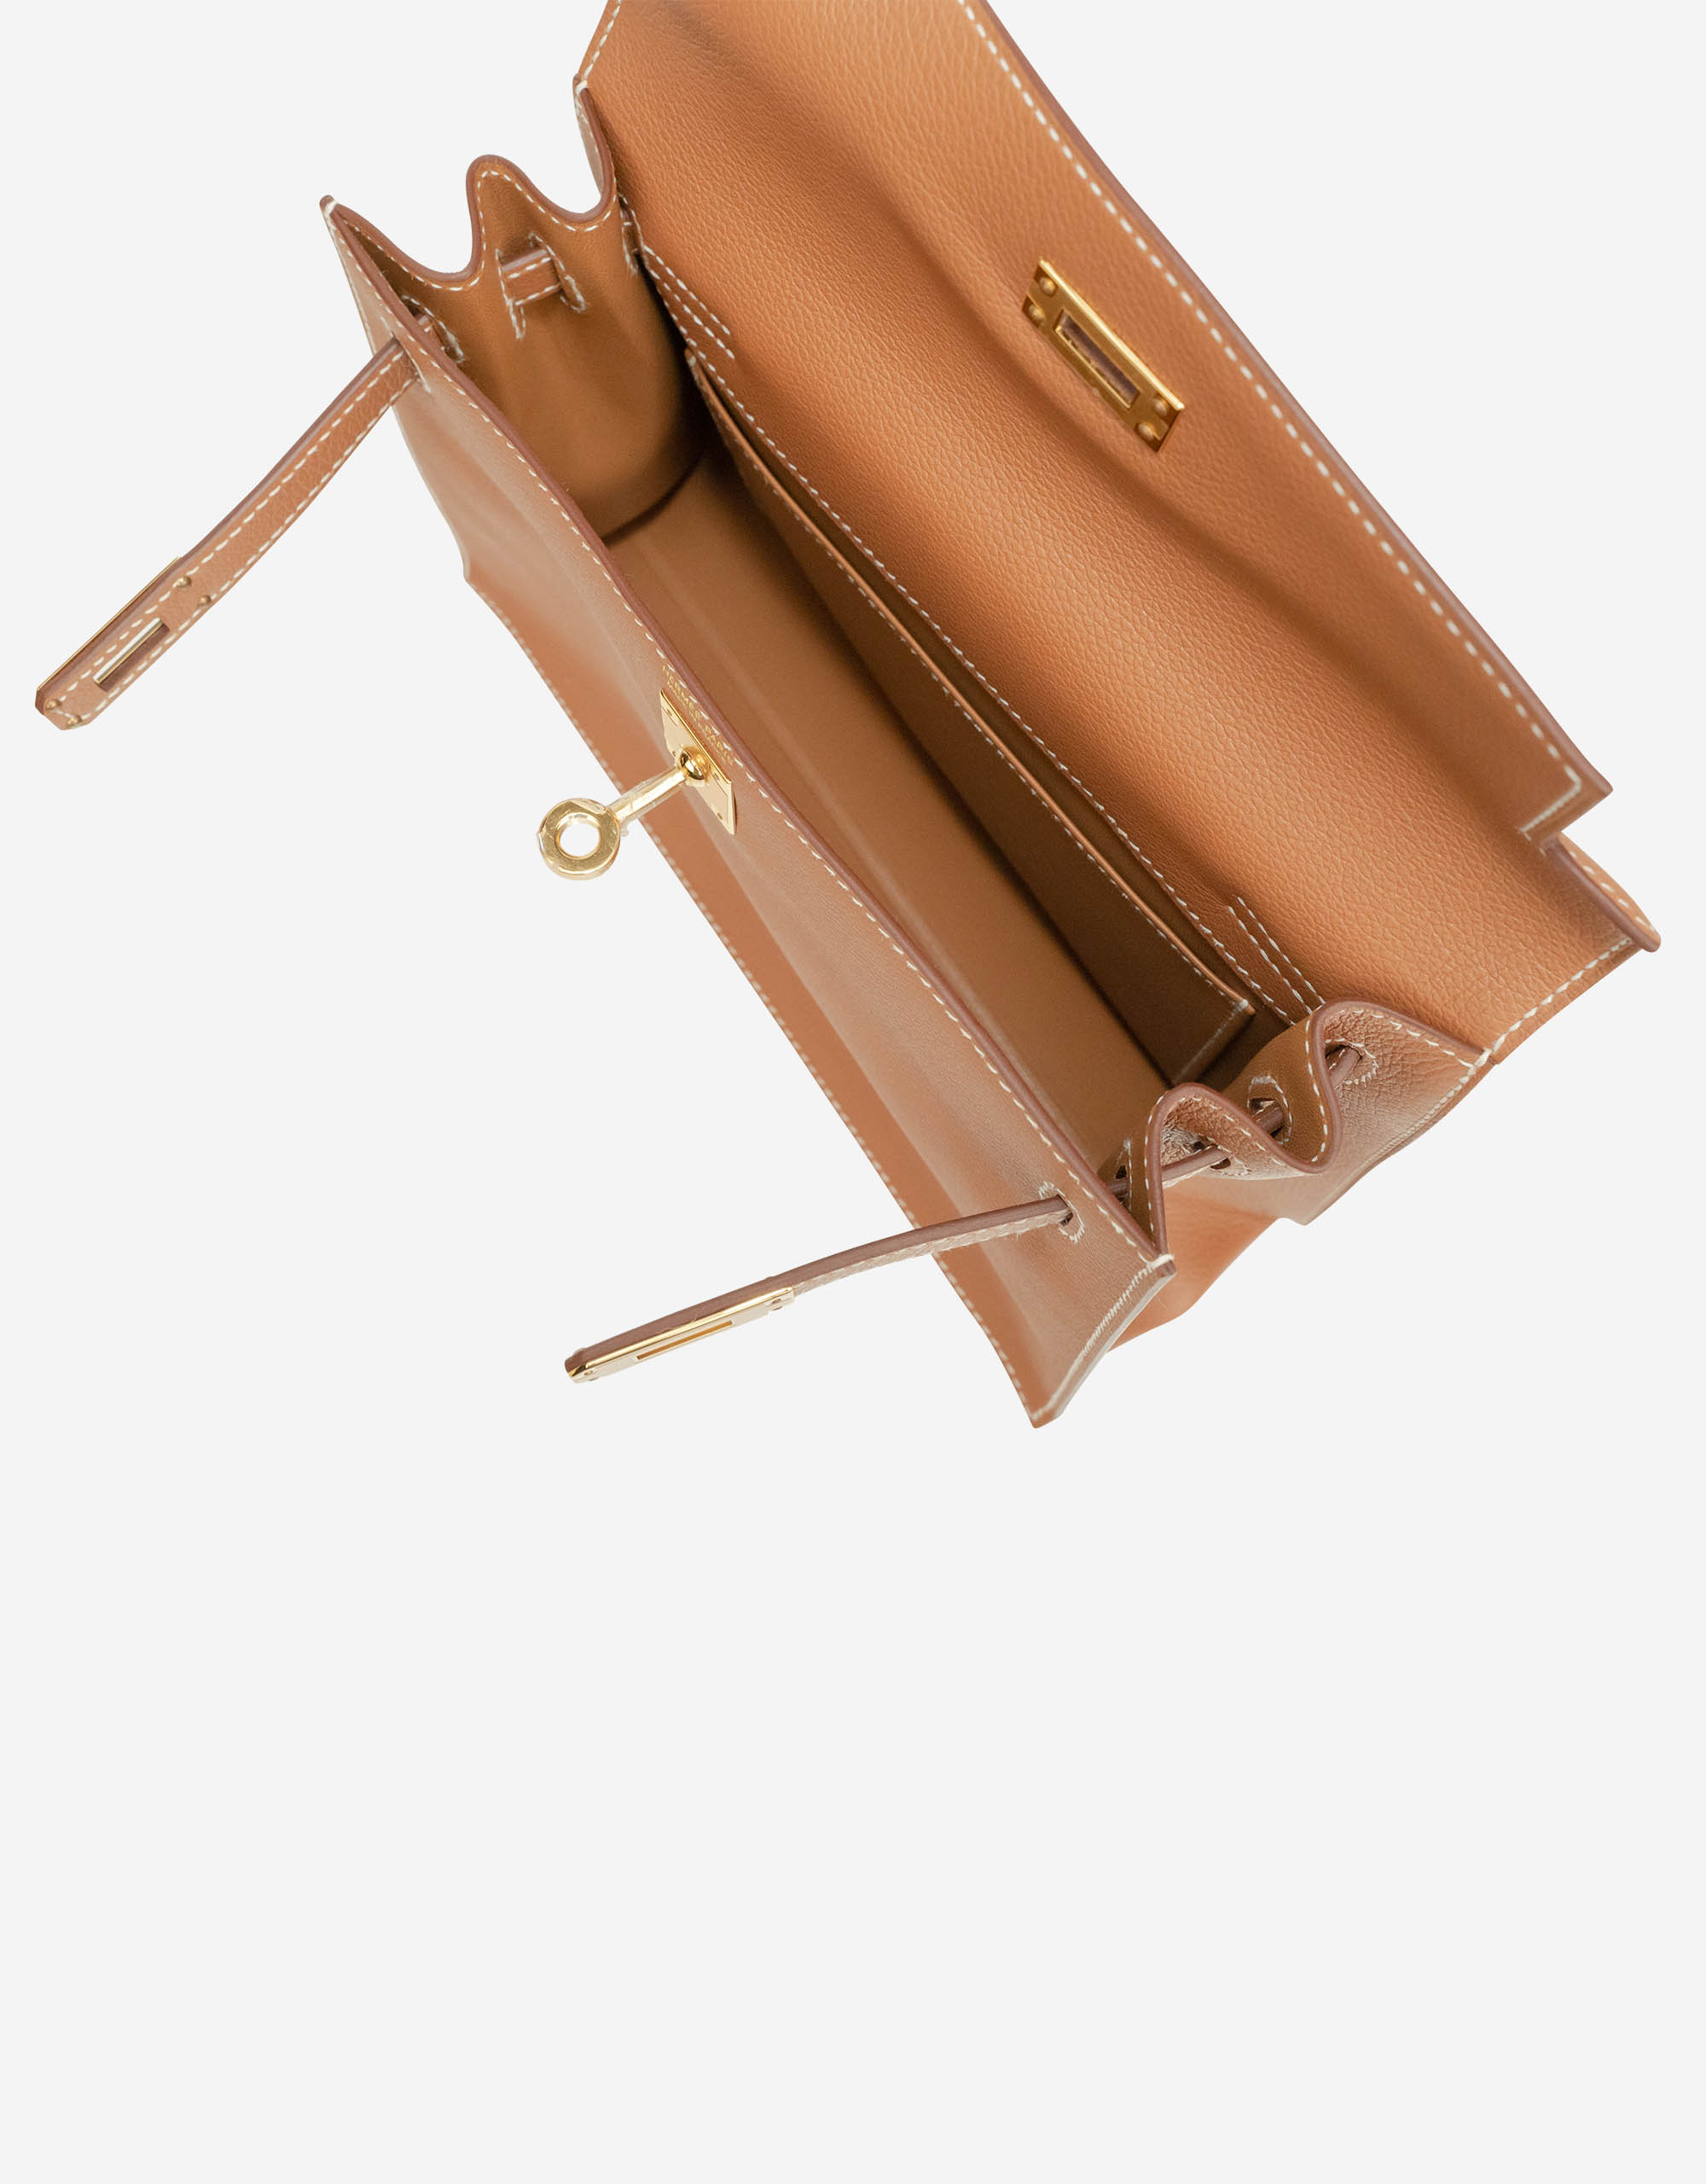 A GOLD EVERGRAIN LEATHER KELLY DANSE WITH GOLD HARDWARE, HERMÈS, 2020